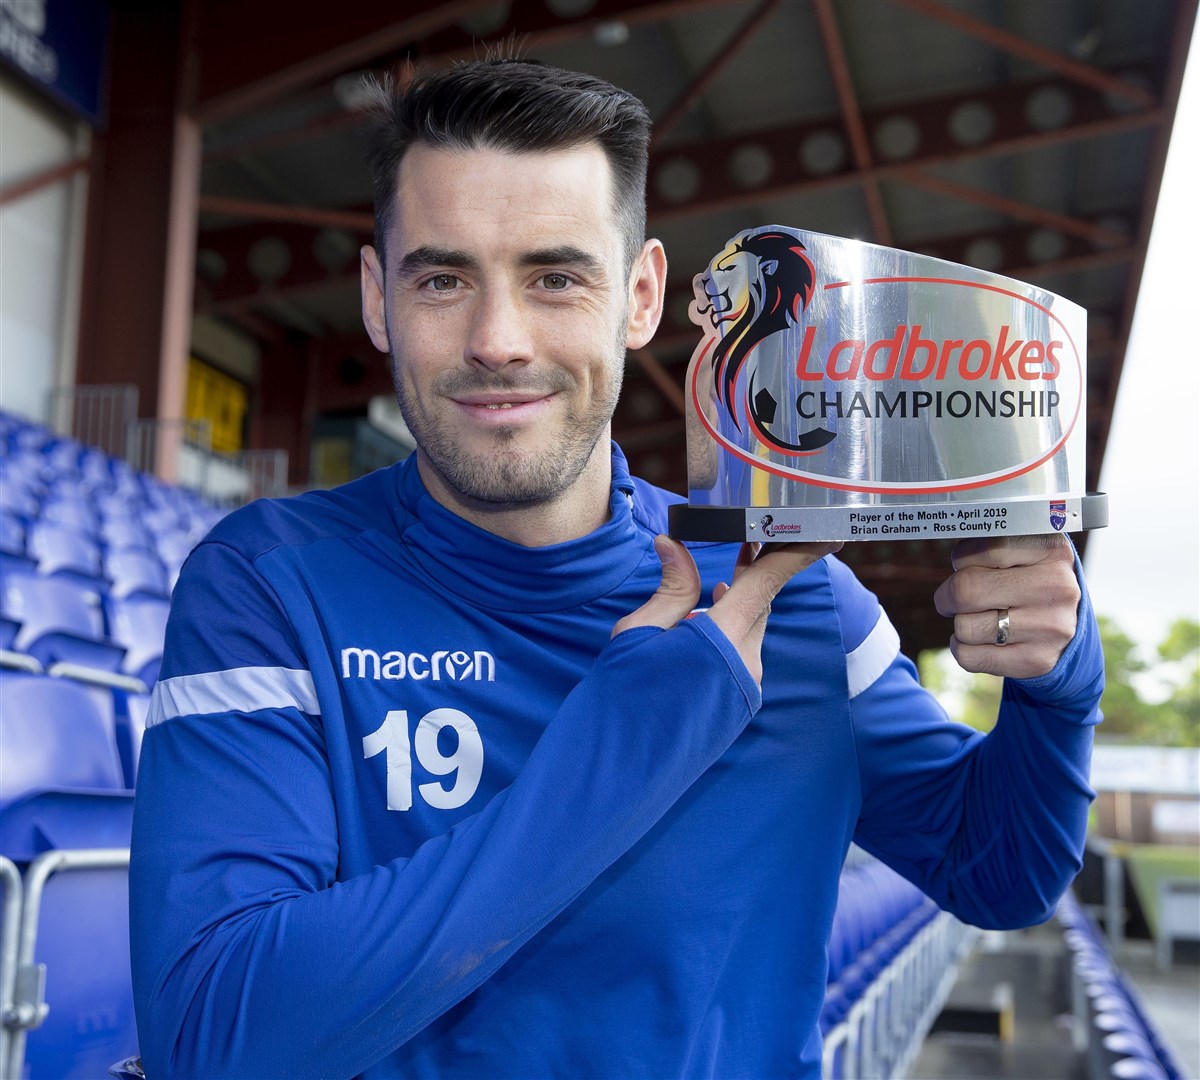 Brian Graham is pictured with his Ladbrokes Championship Player of the Month award for April.